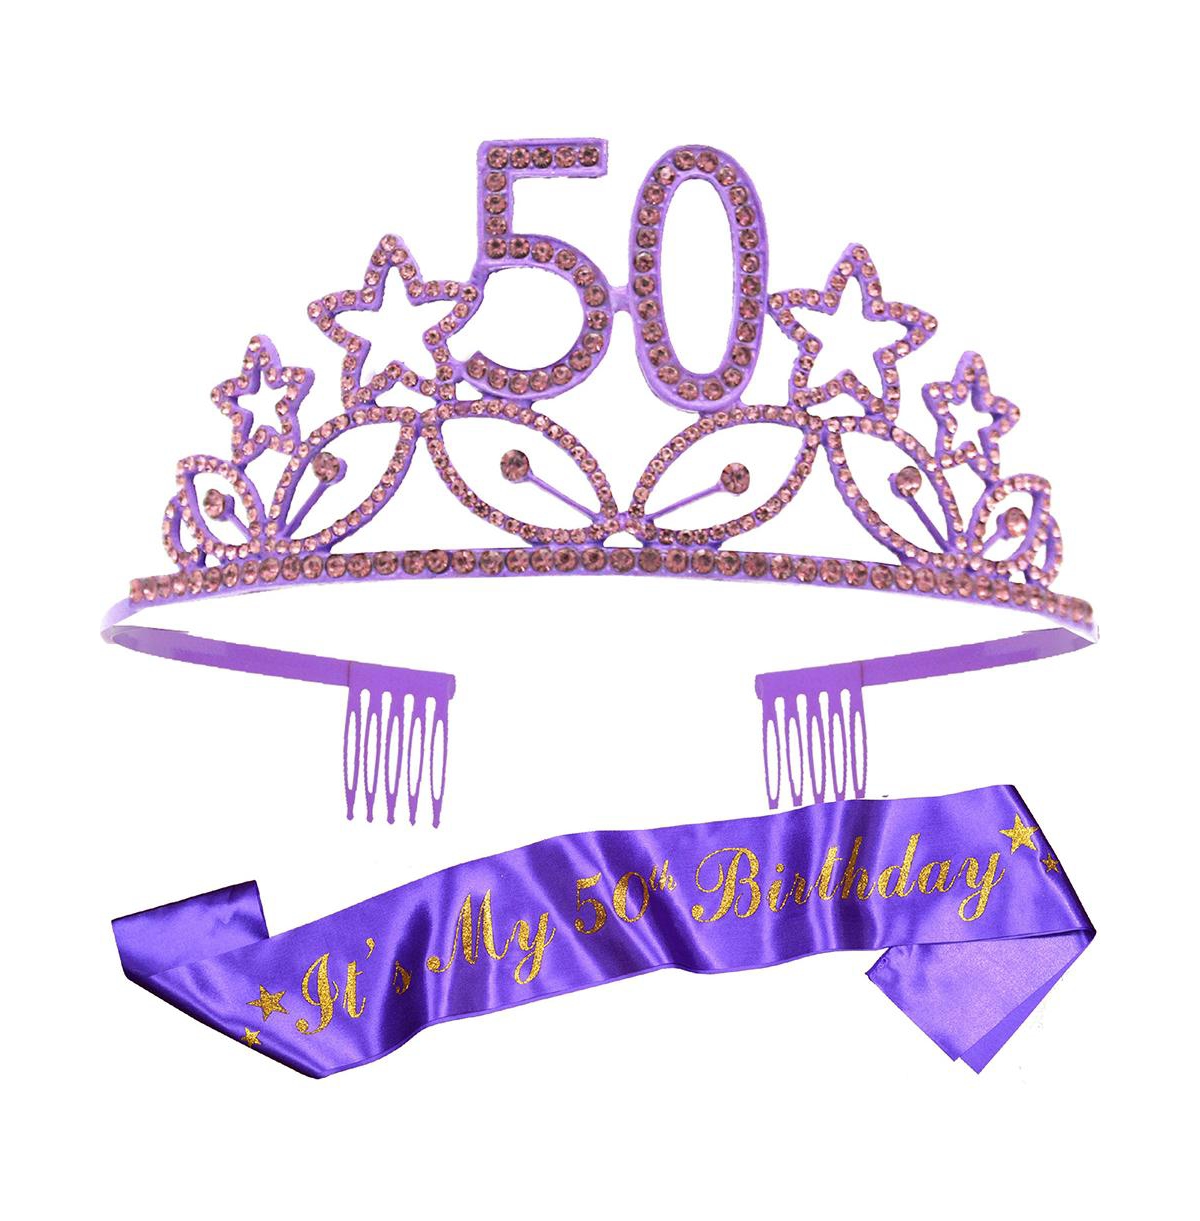 50th Birthday Gift Set for Women - Elegant Tiara and Sash in Purple - Perfect for Celebrating Milestone Birthday and Party Supplies - Purple